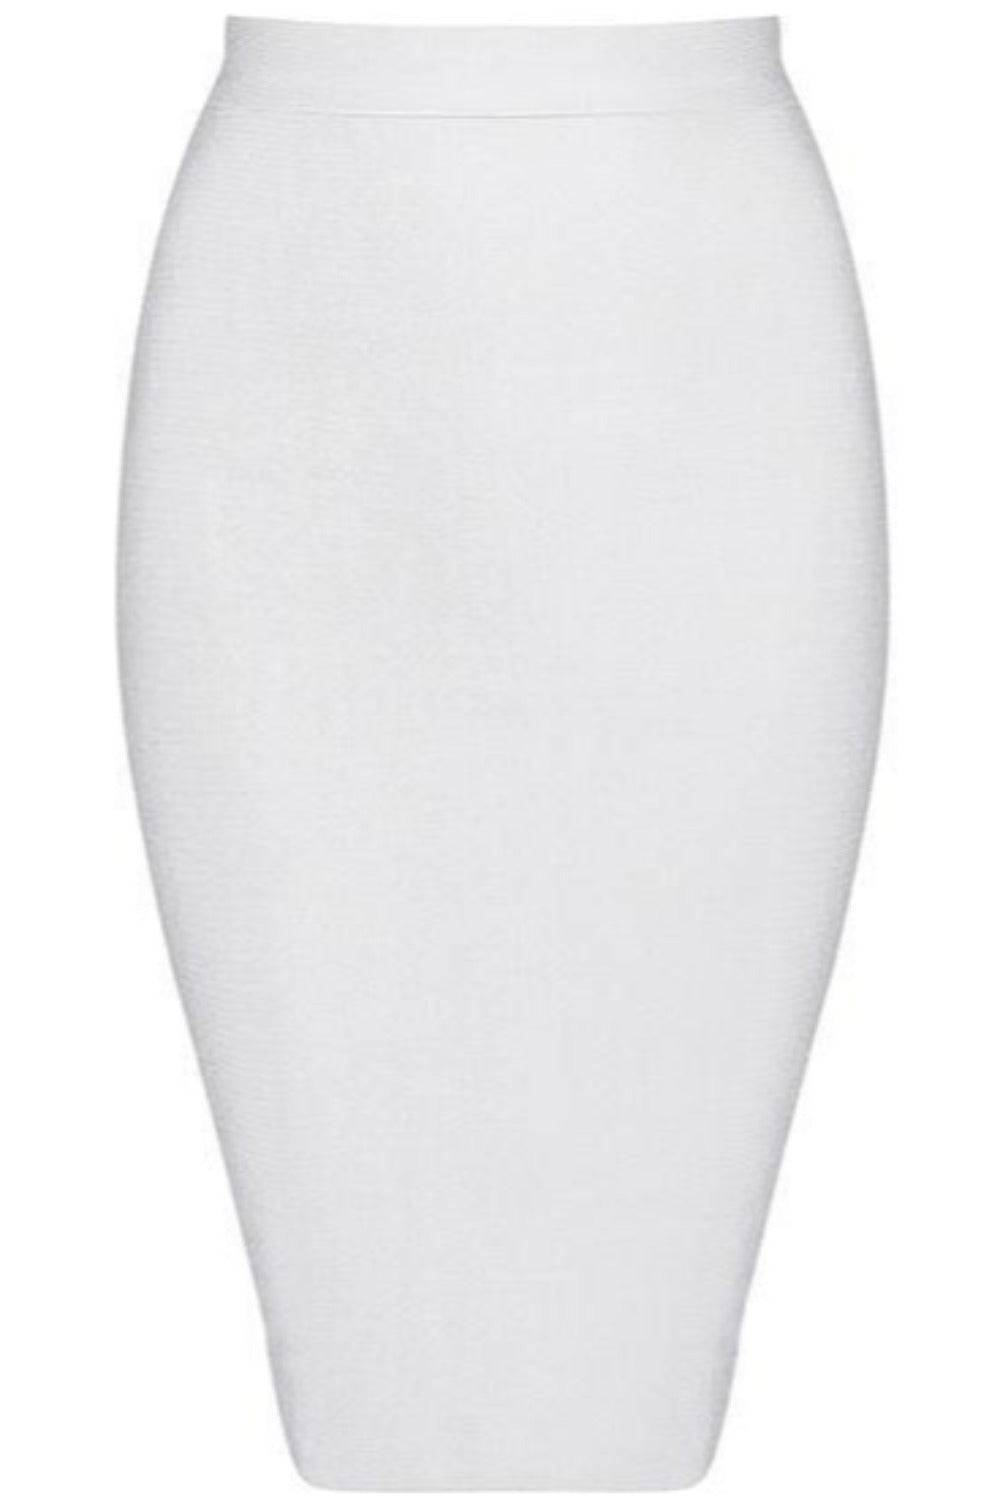 High Waisted Bodycon Pencil Skirt - TGC Boutique - Skirts